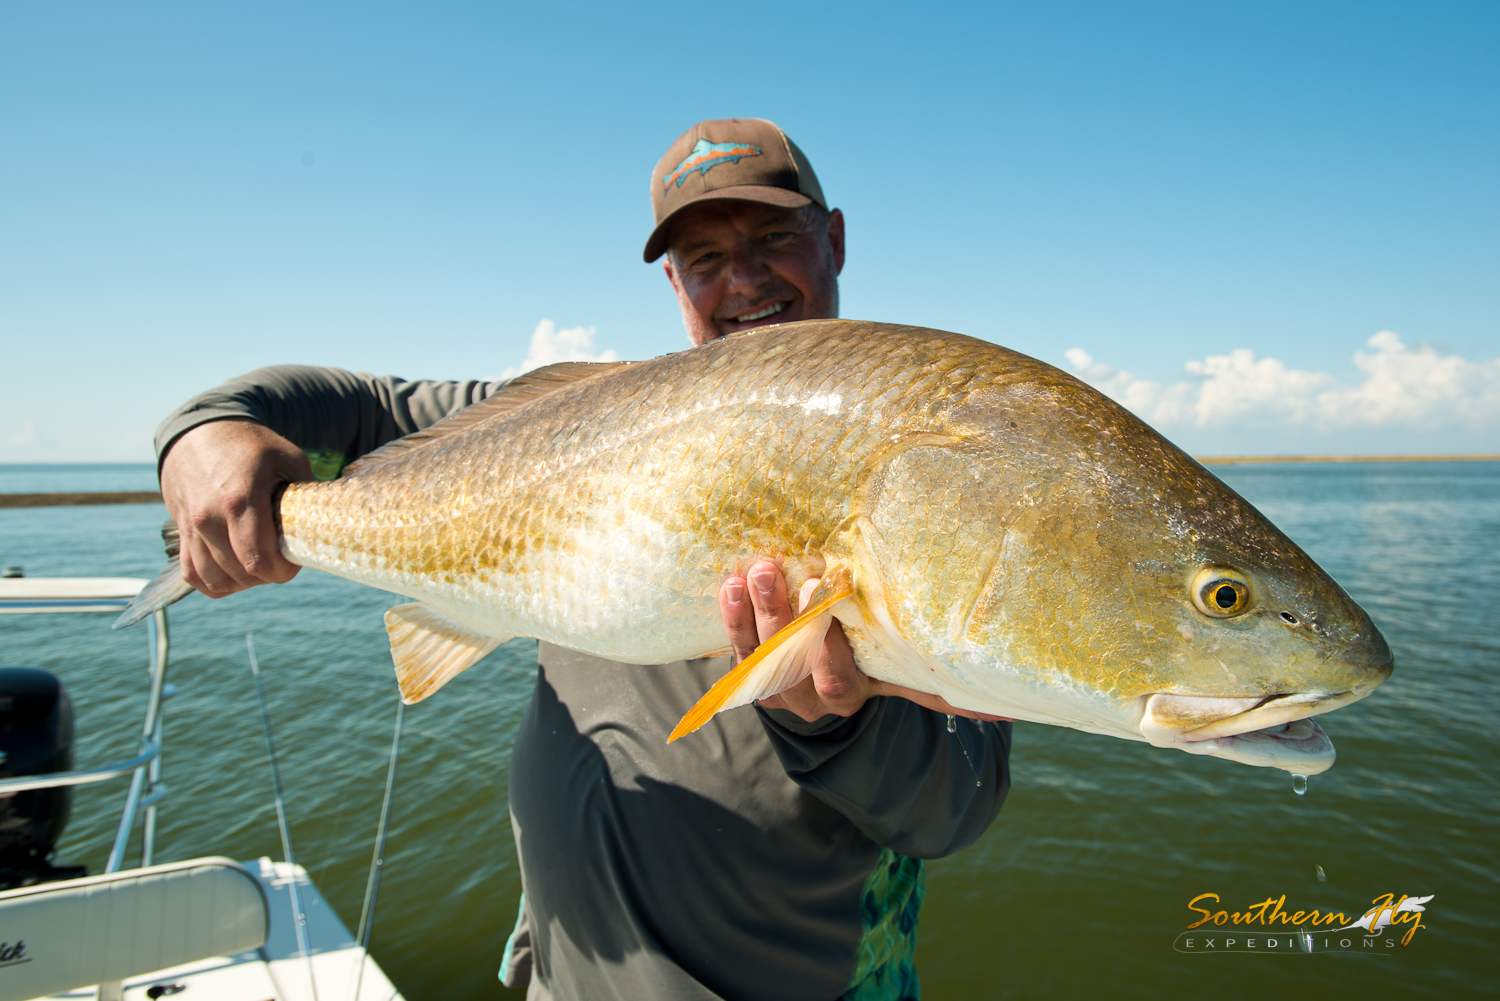 charter fishing guide new orleans la with capt. brandon keck and Southern Fly Expeditions